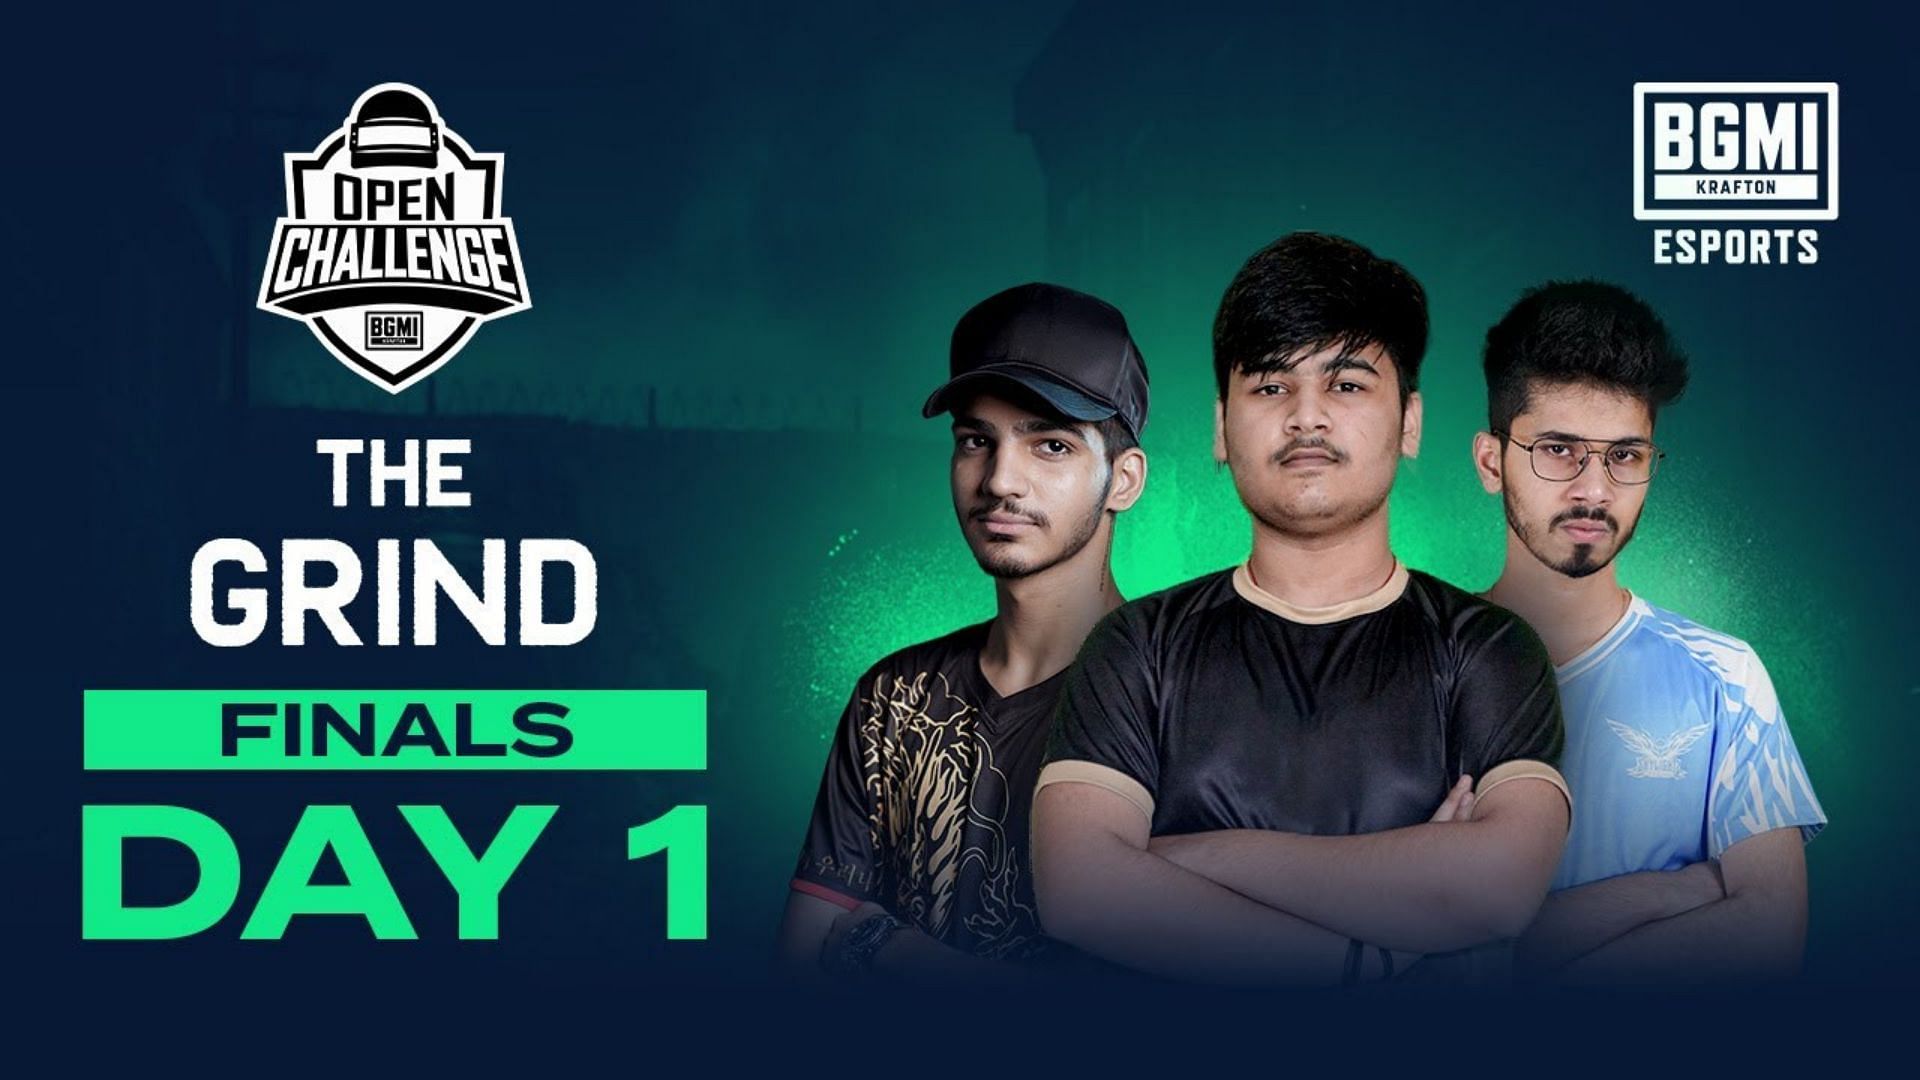 The Grind Finals Day 1 will start from 5 PM onwards (Image via BGMI)